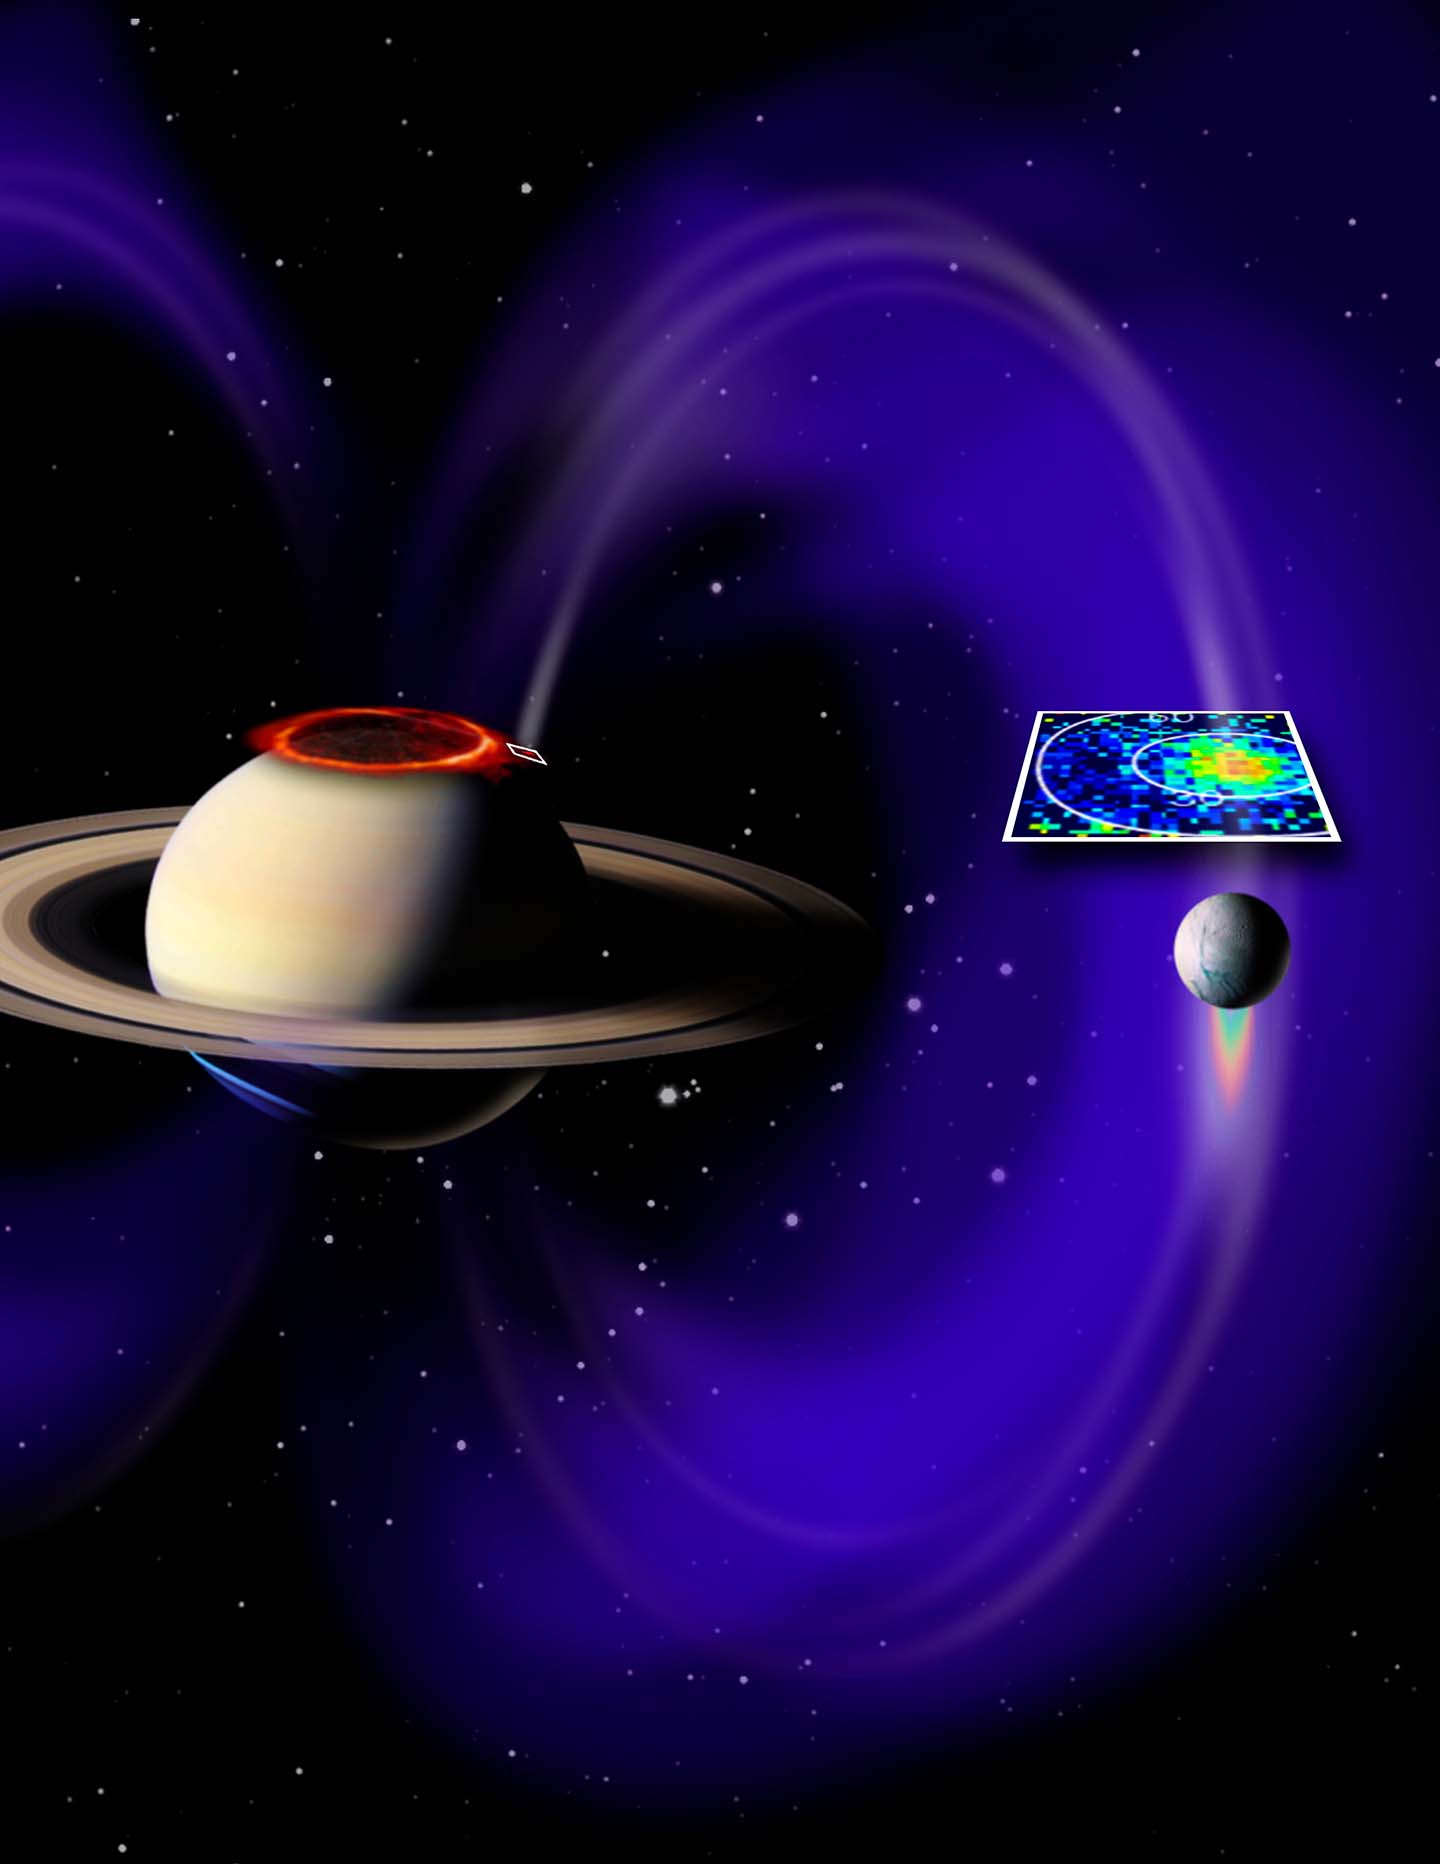 This artist's concept shows a glowing patch of ultraviolet light near Saturn's north pole that occurs at the “footprint” of the magnetic connection between Saturn and its moon Enceladus.